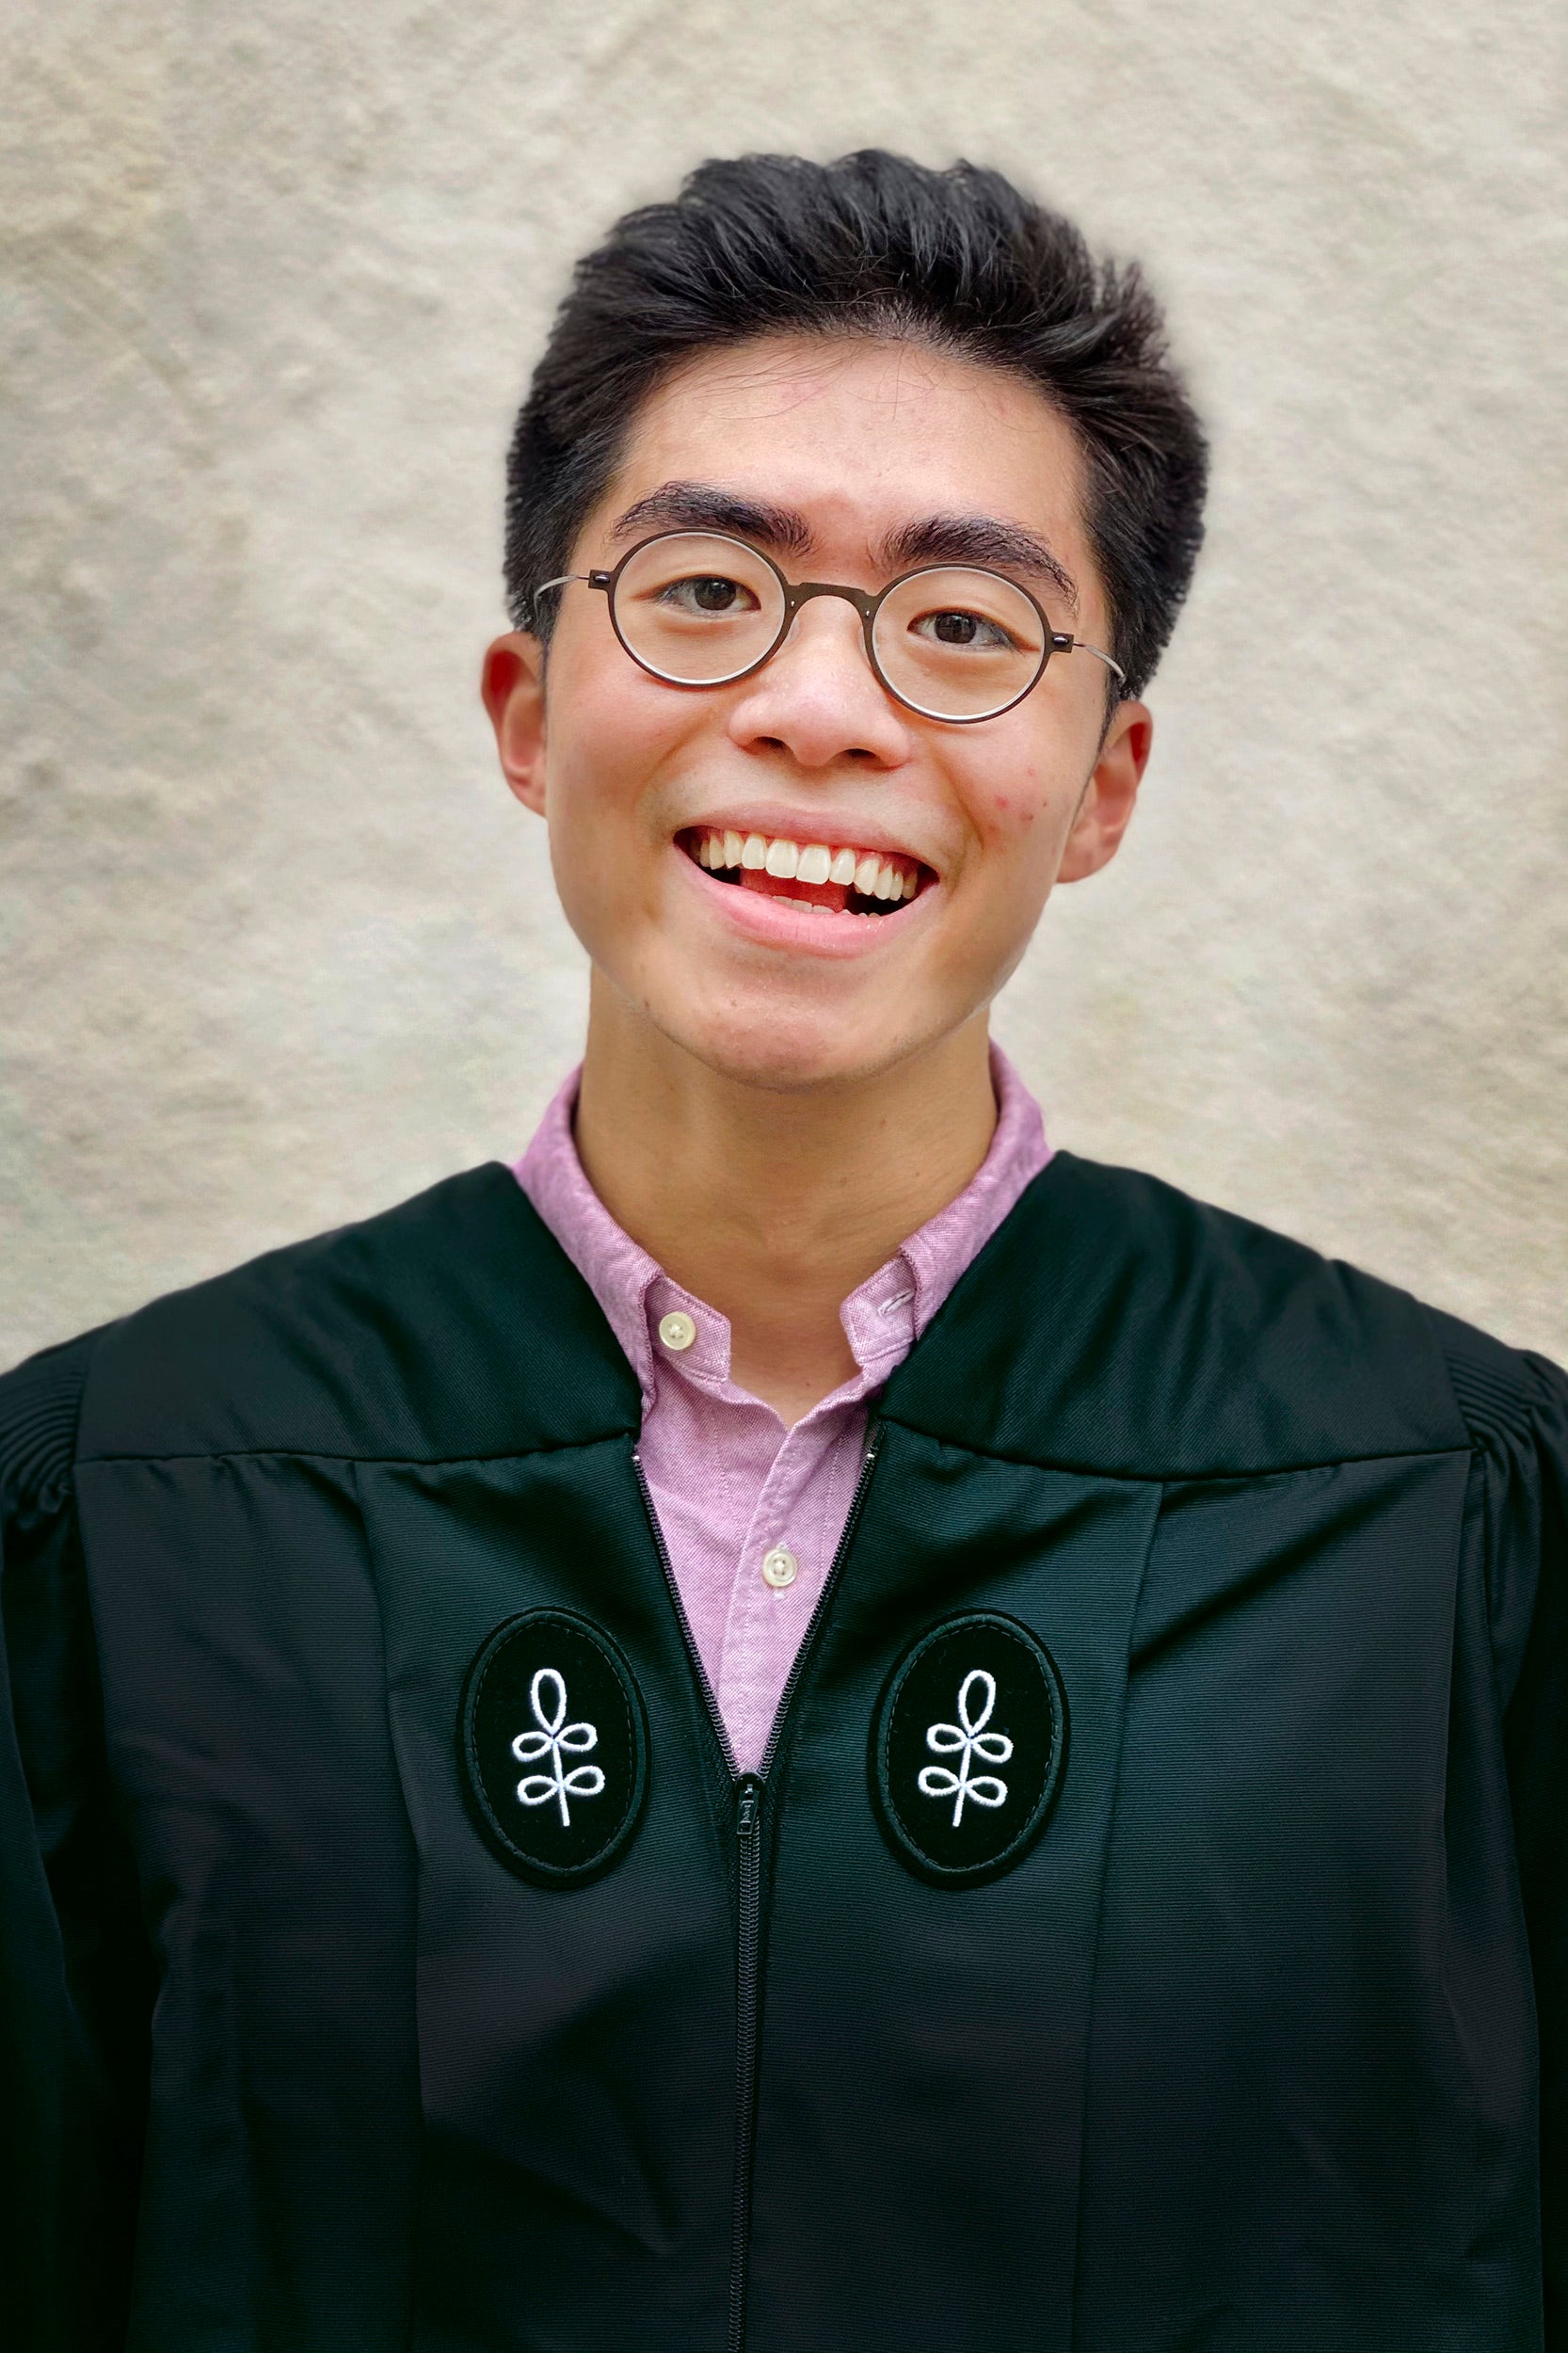 Justin Wei is pictured.